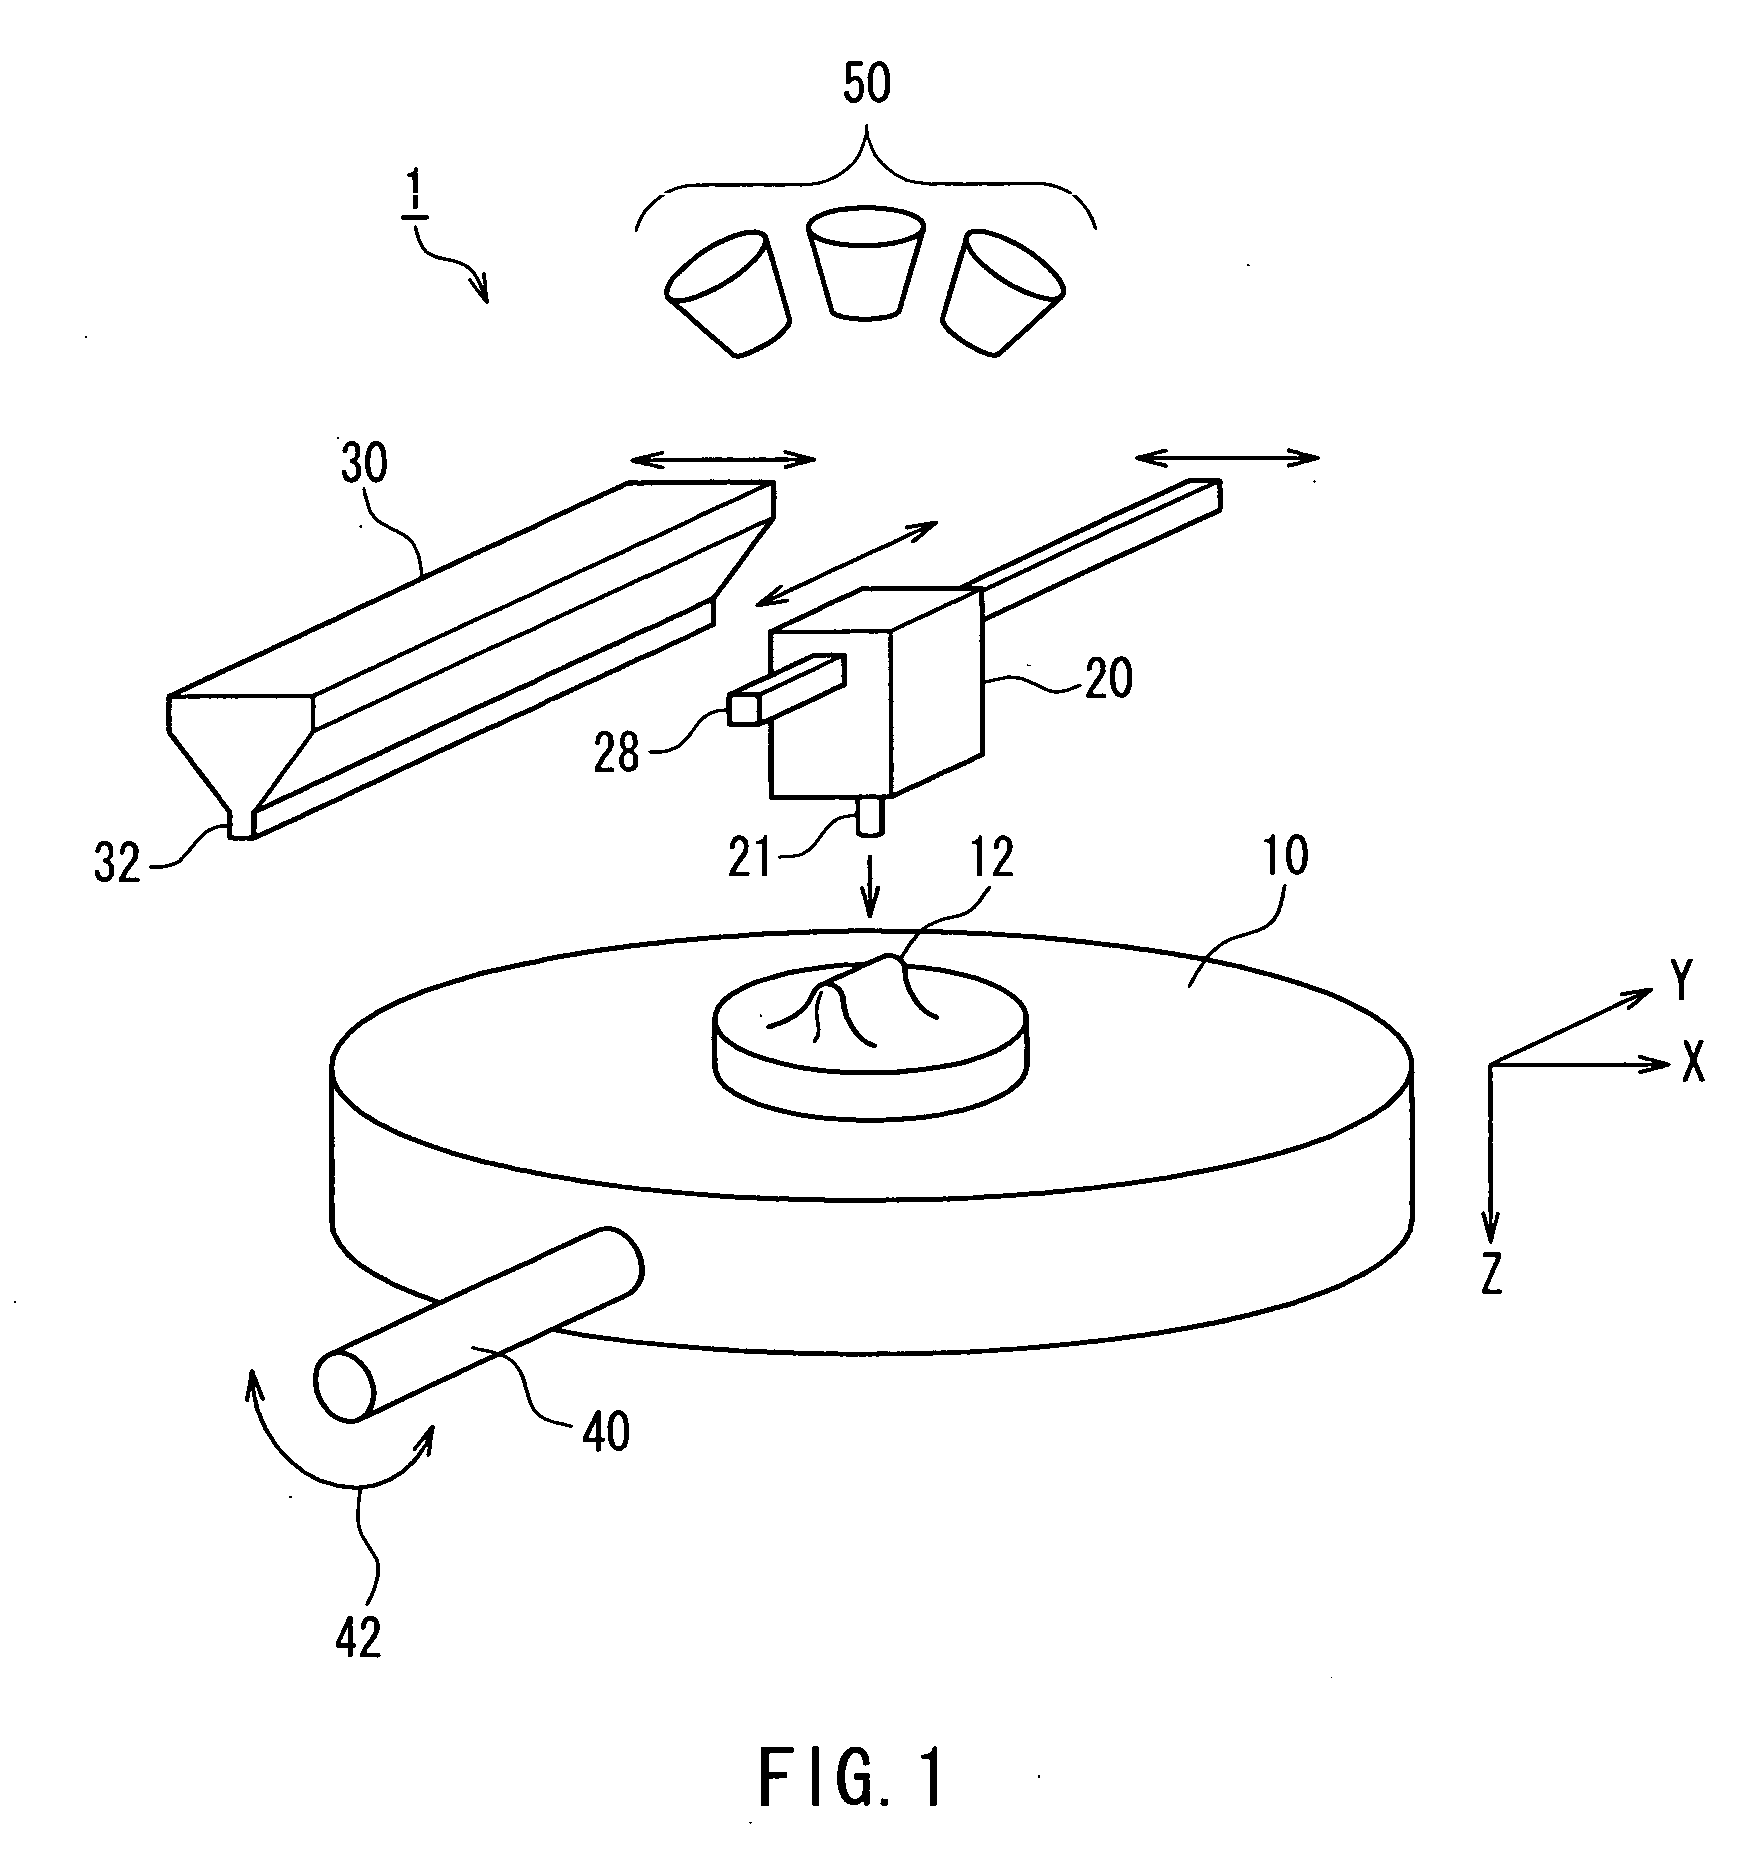 Apparatus for Forming Layered Object